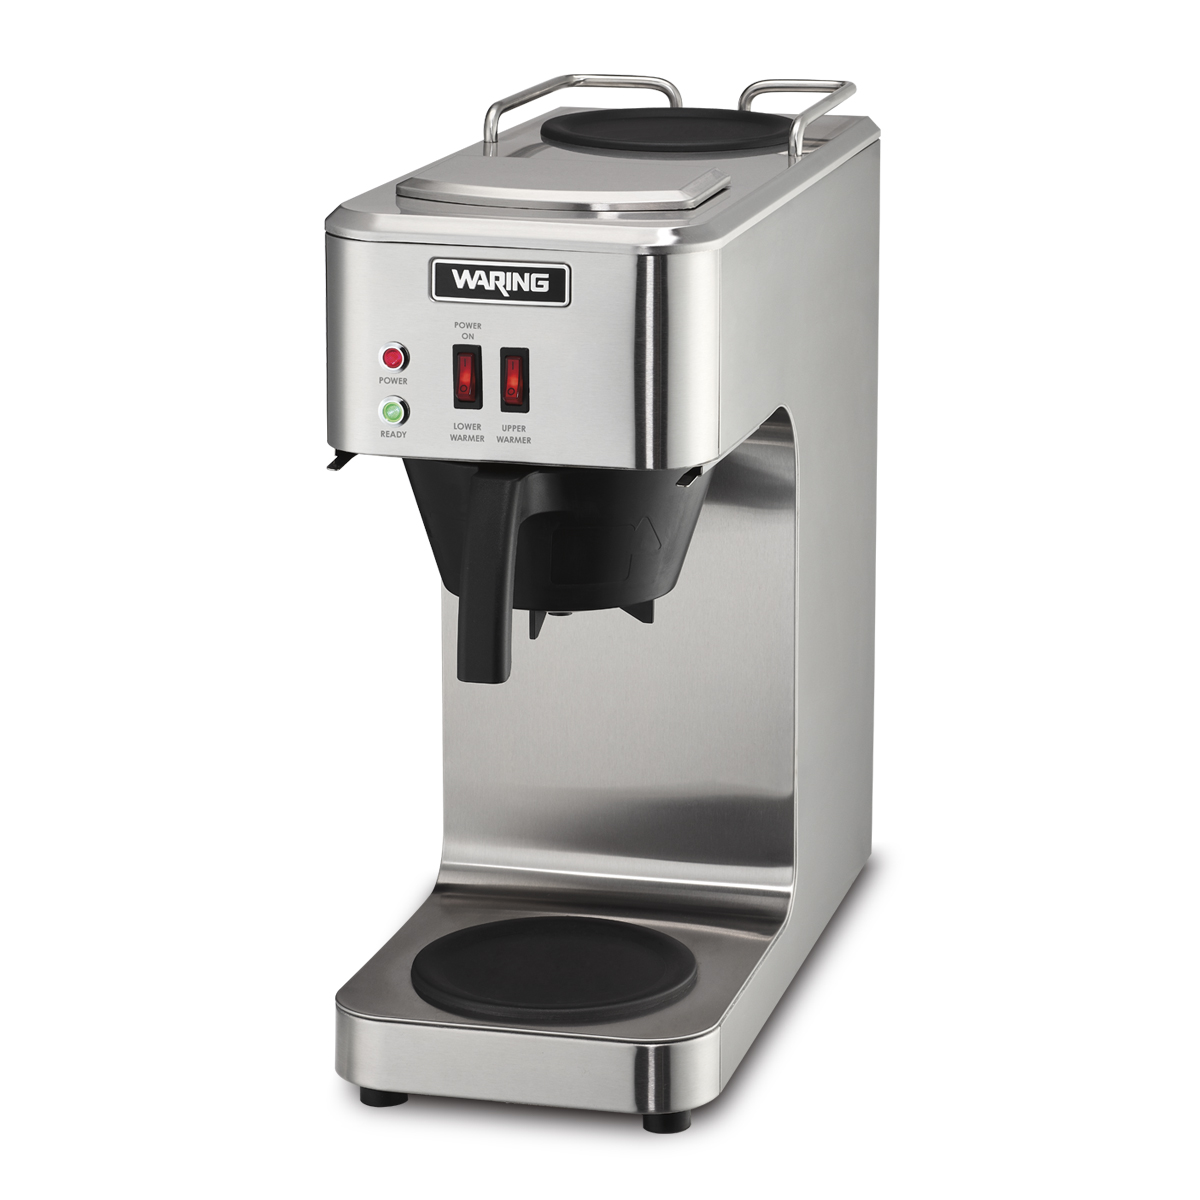 https://www.waringcommercialproducts.com/files/products/wcm50-waring-cafe-deco-pour-over-coffee-brewer-main-image-1200x1200.jpg